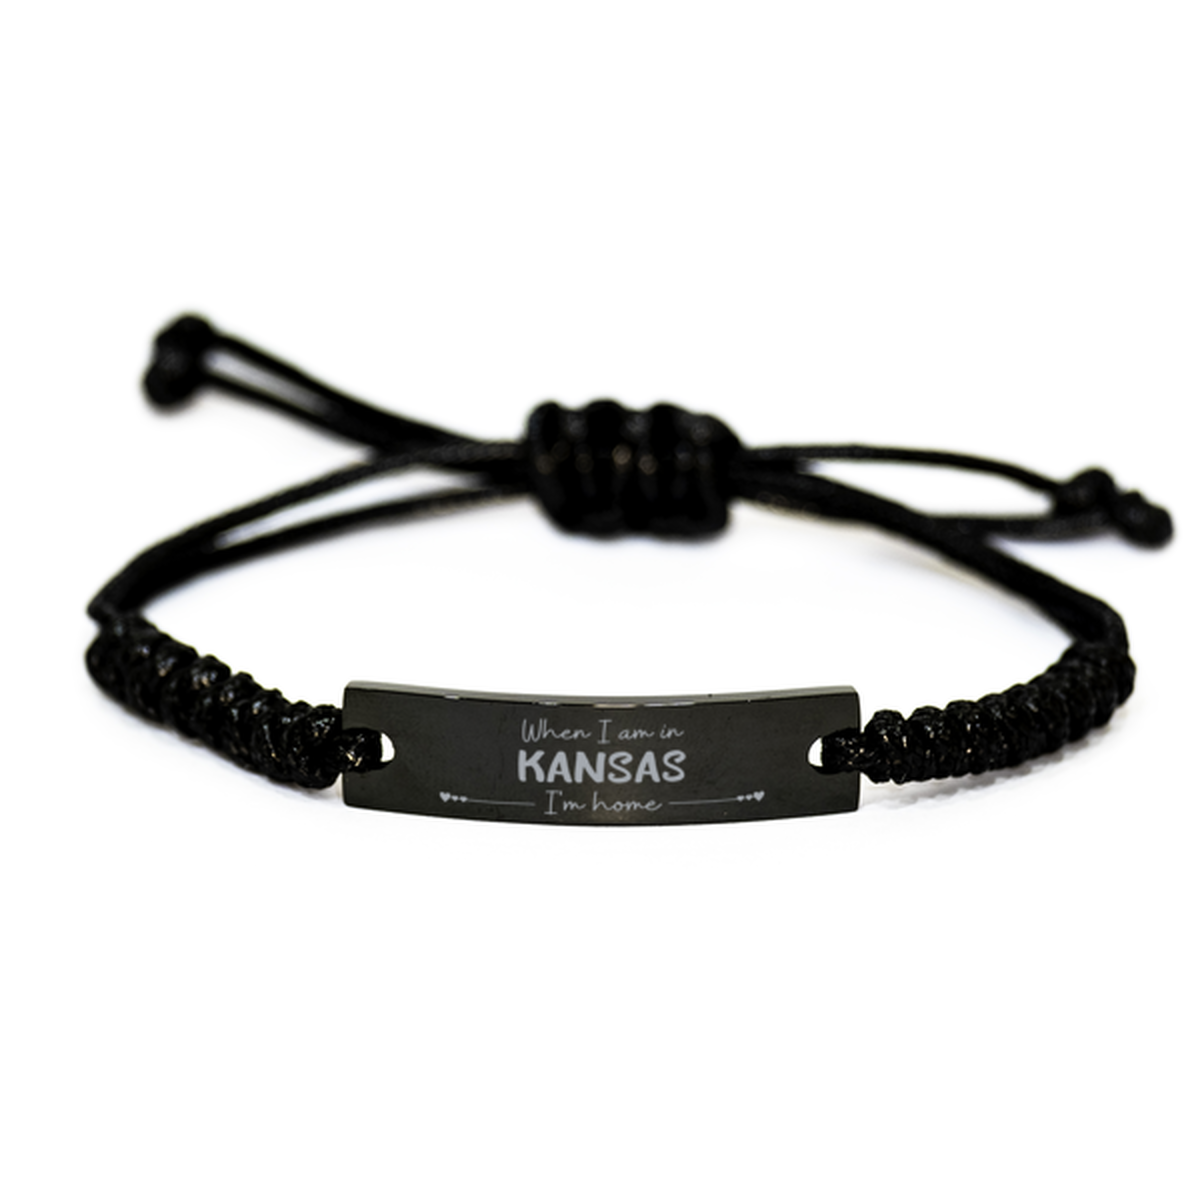 When I am in Kansas I'm home Black Rope Bracelet, Cheap Gifts For Kansas, State Kansas Birthday Gifts for Friends Coworker